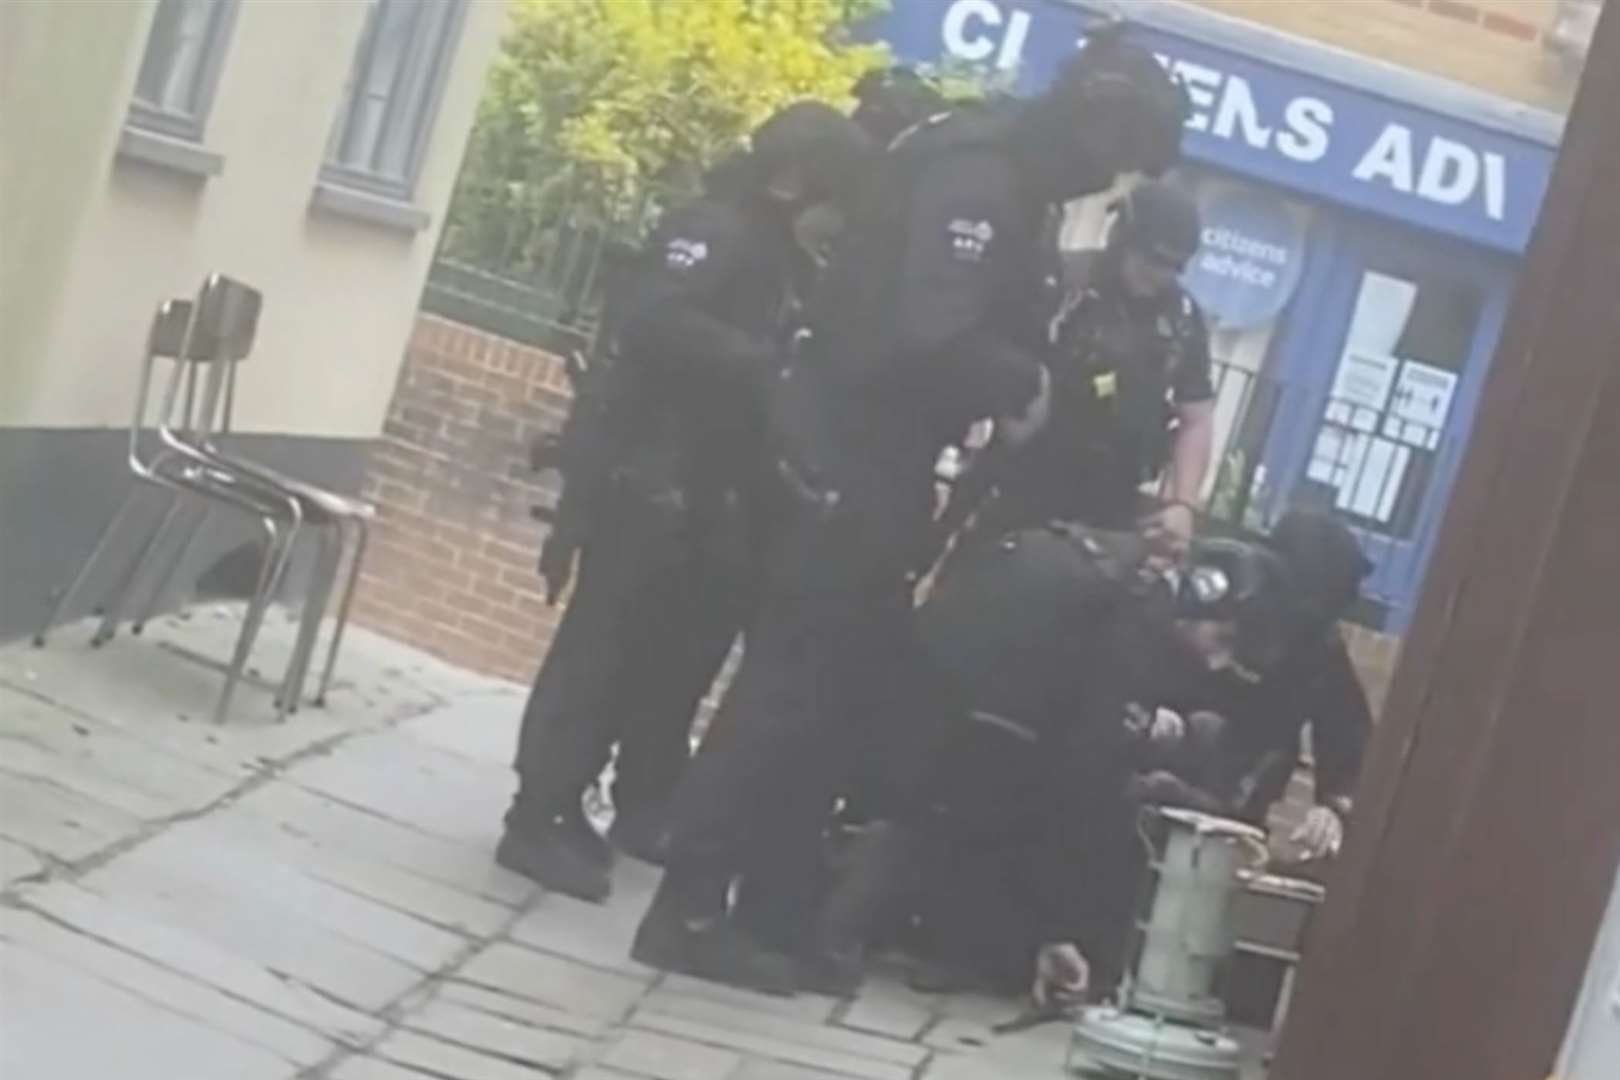 Armed police were seen pinning a man to the ground